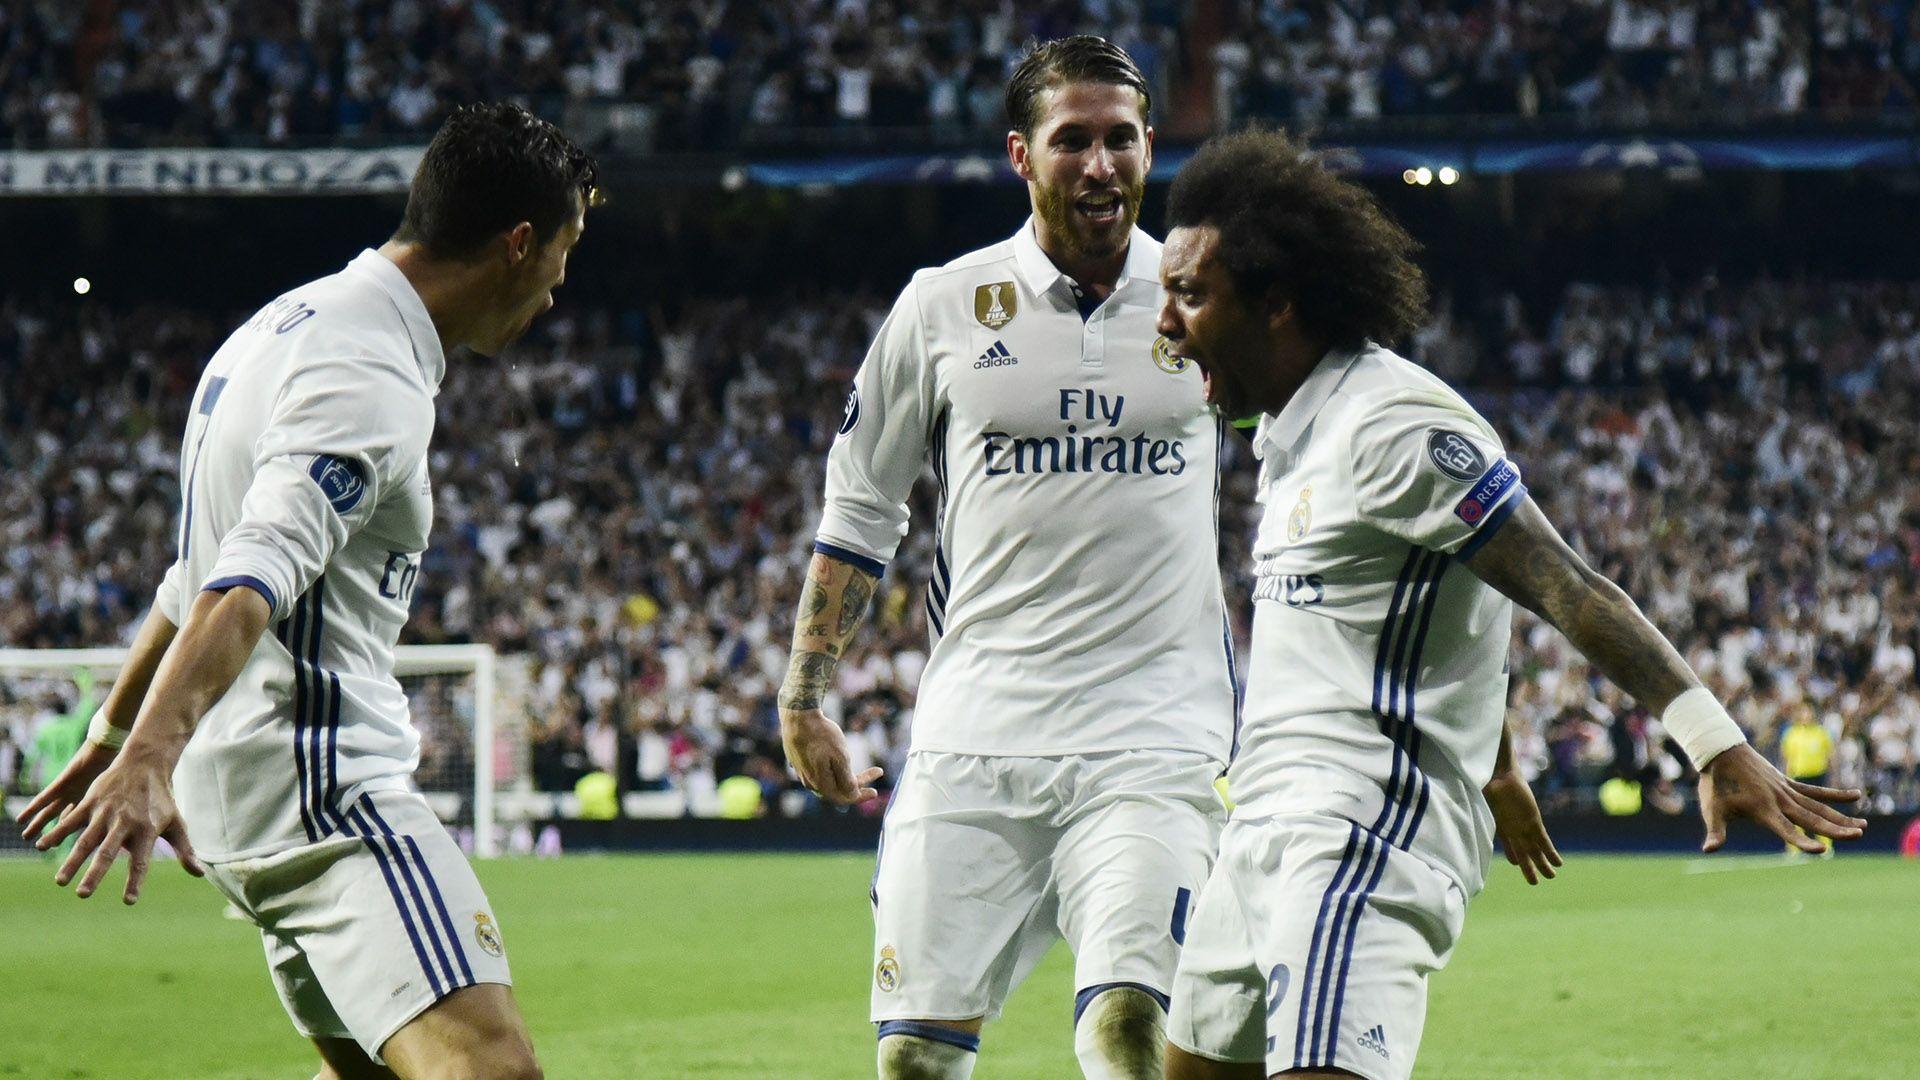 Marcelo's mantle: Running with Roberto Carlos at Real Madrid